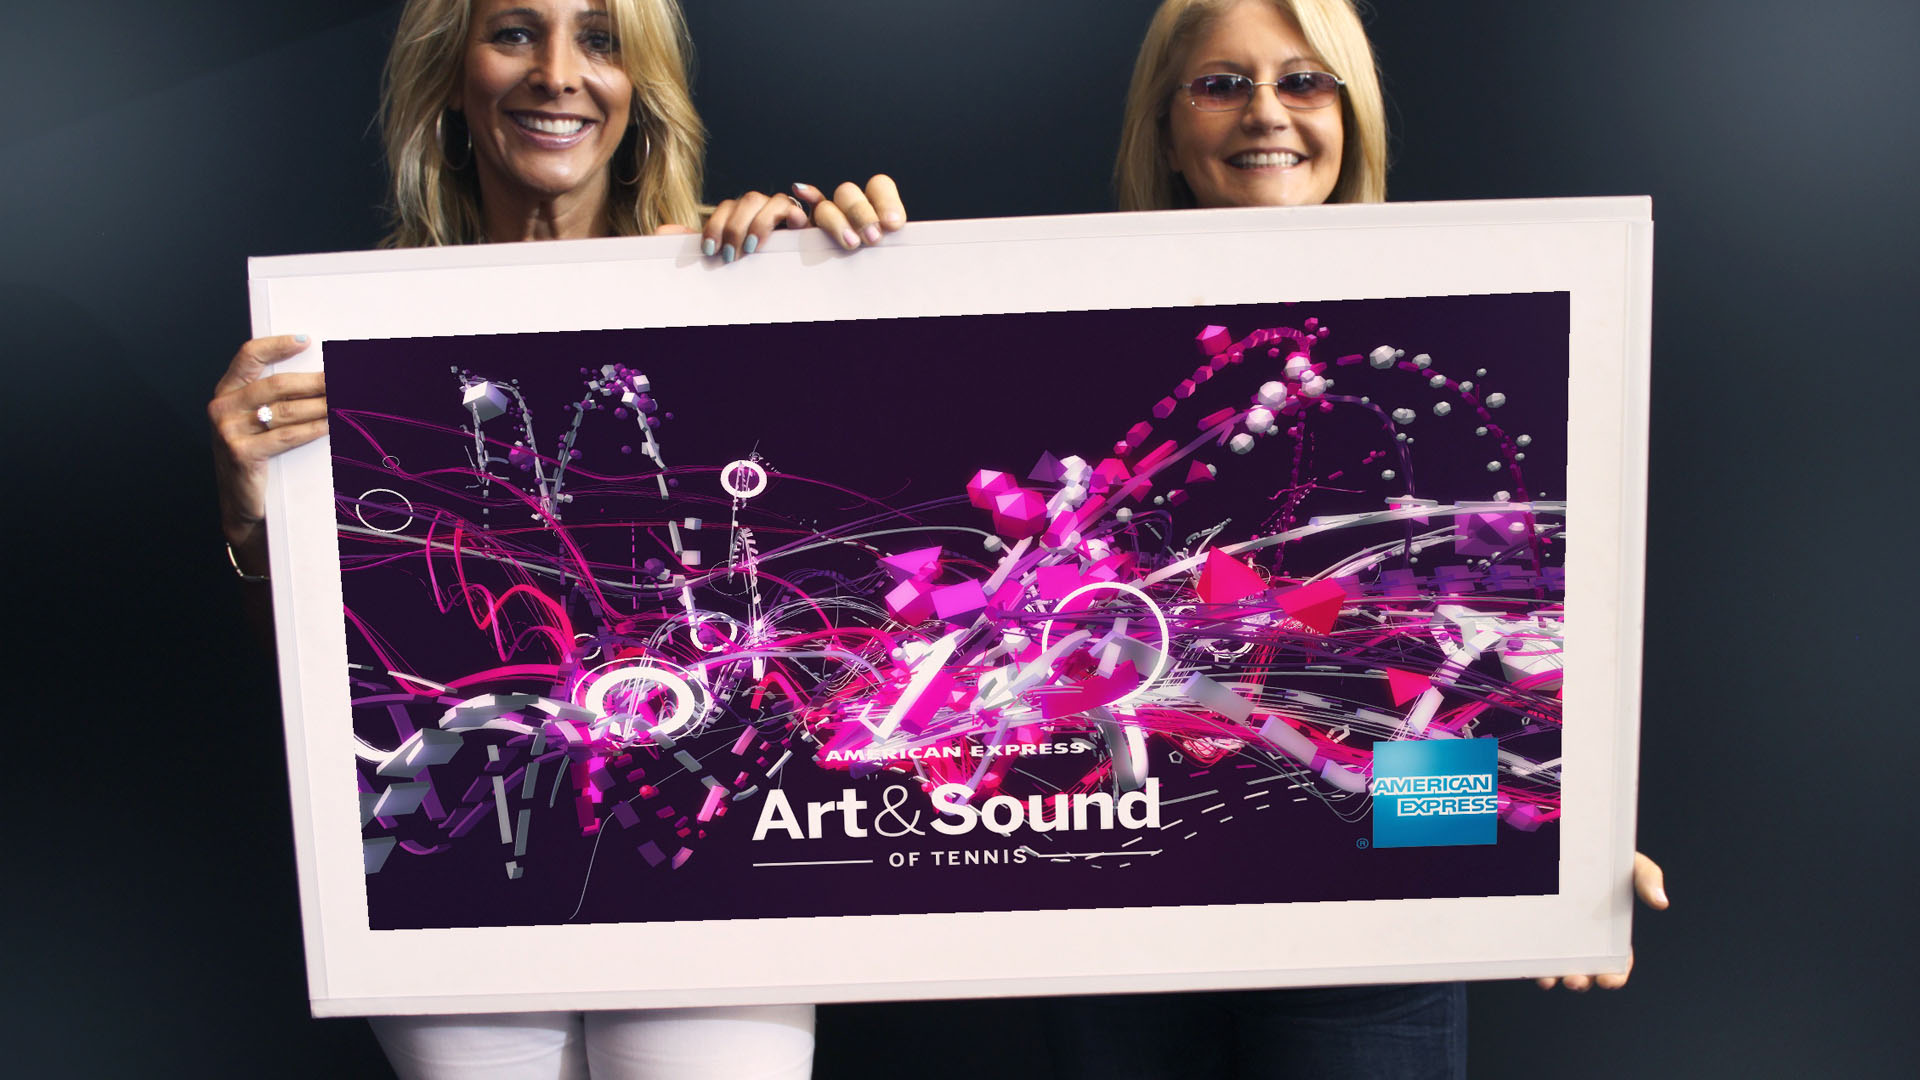 Art and Sound of Tennis - participants could get their picture taken with their creation